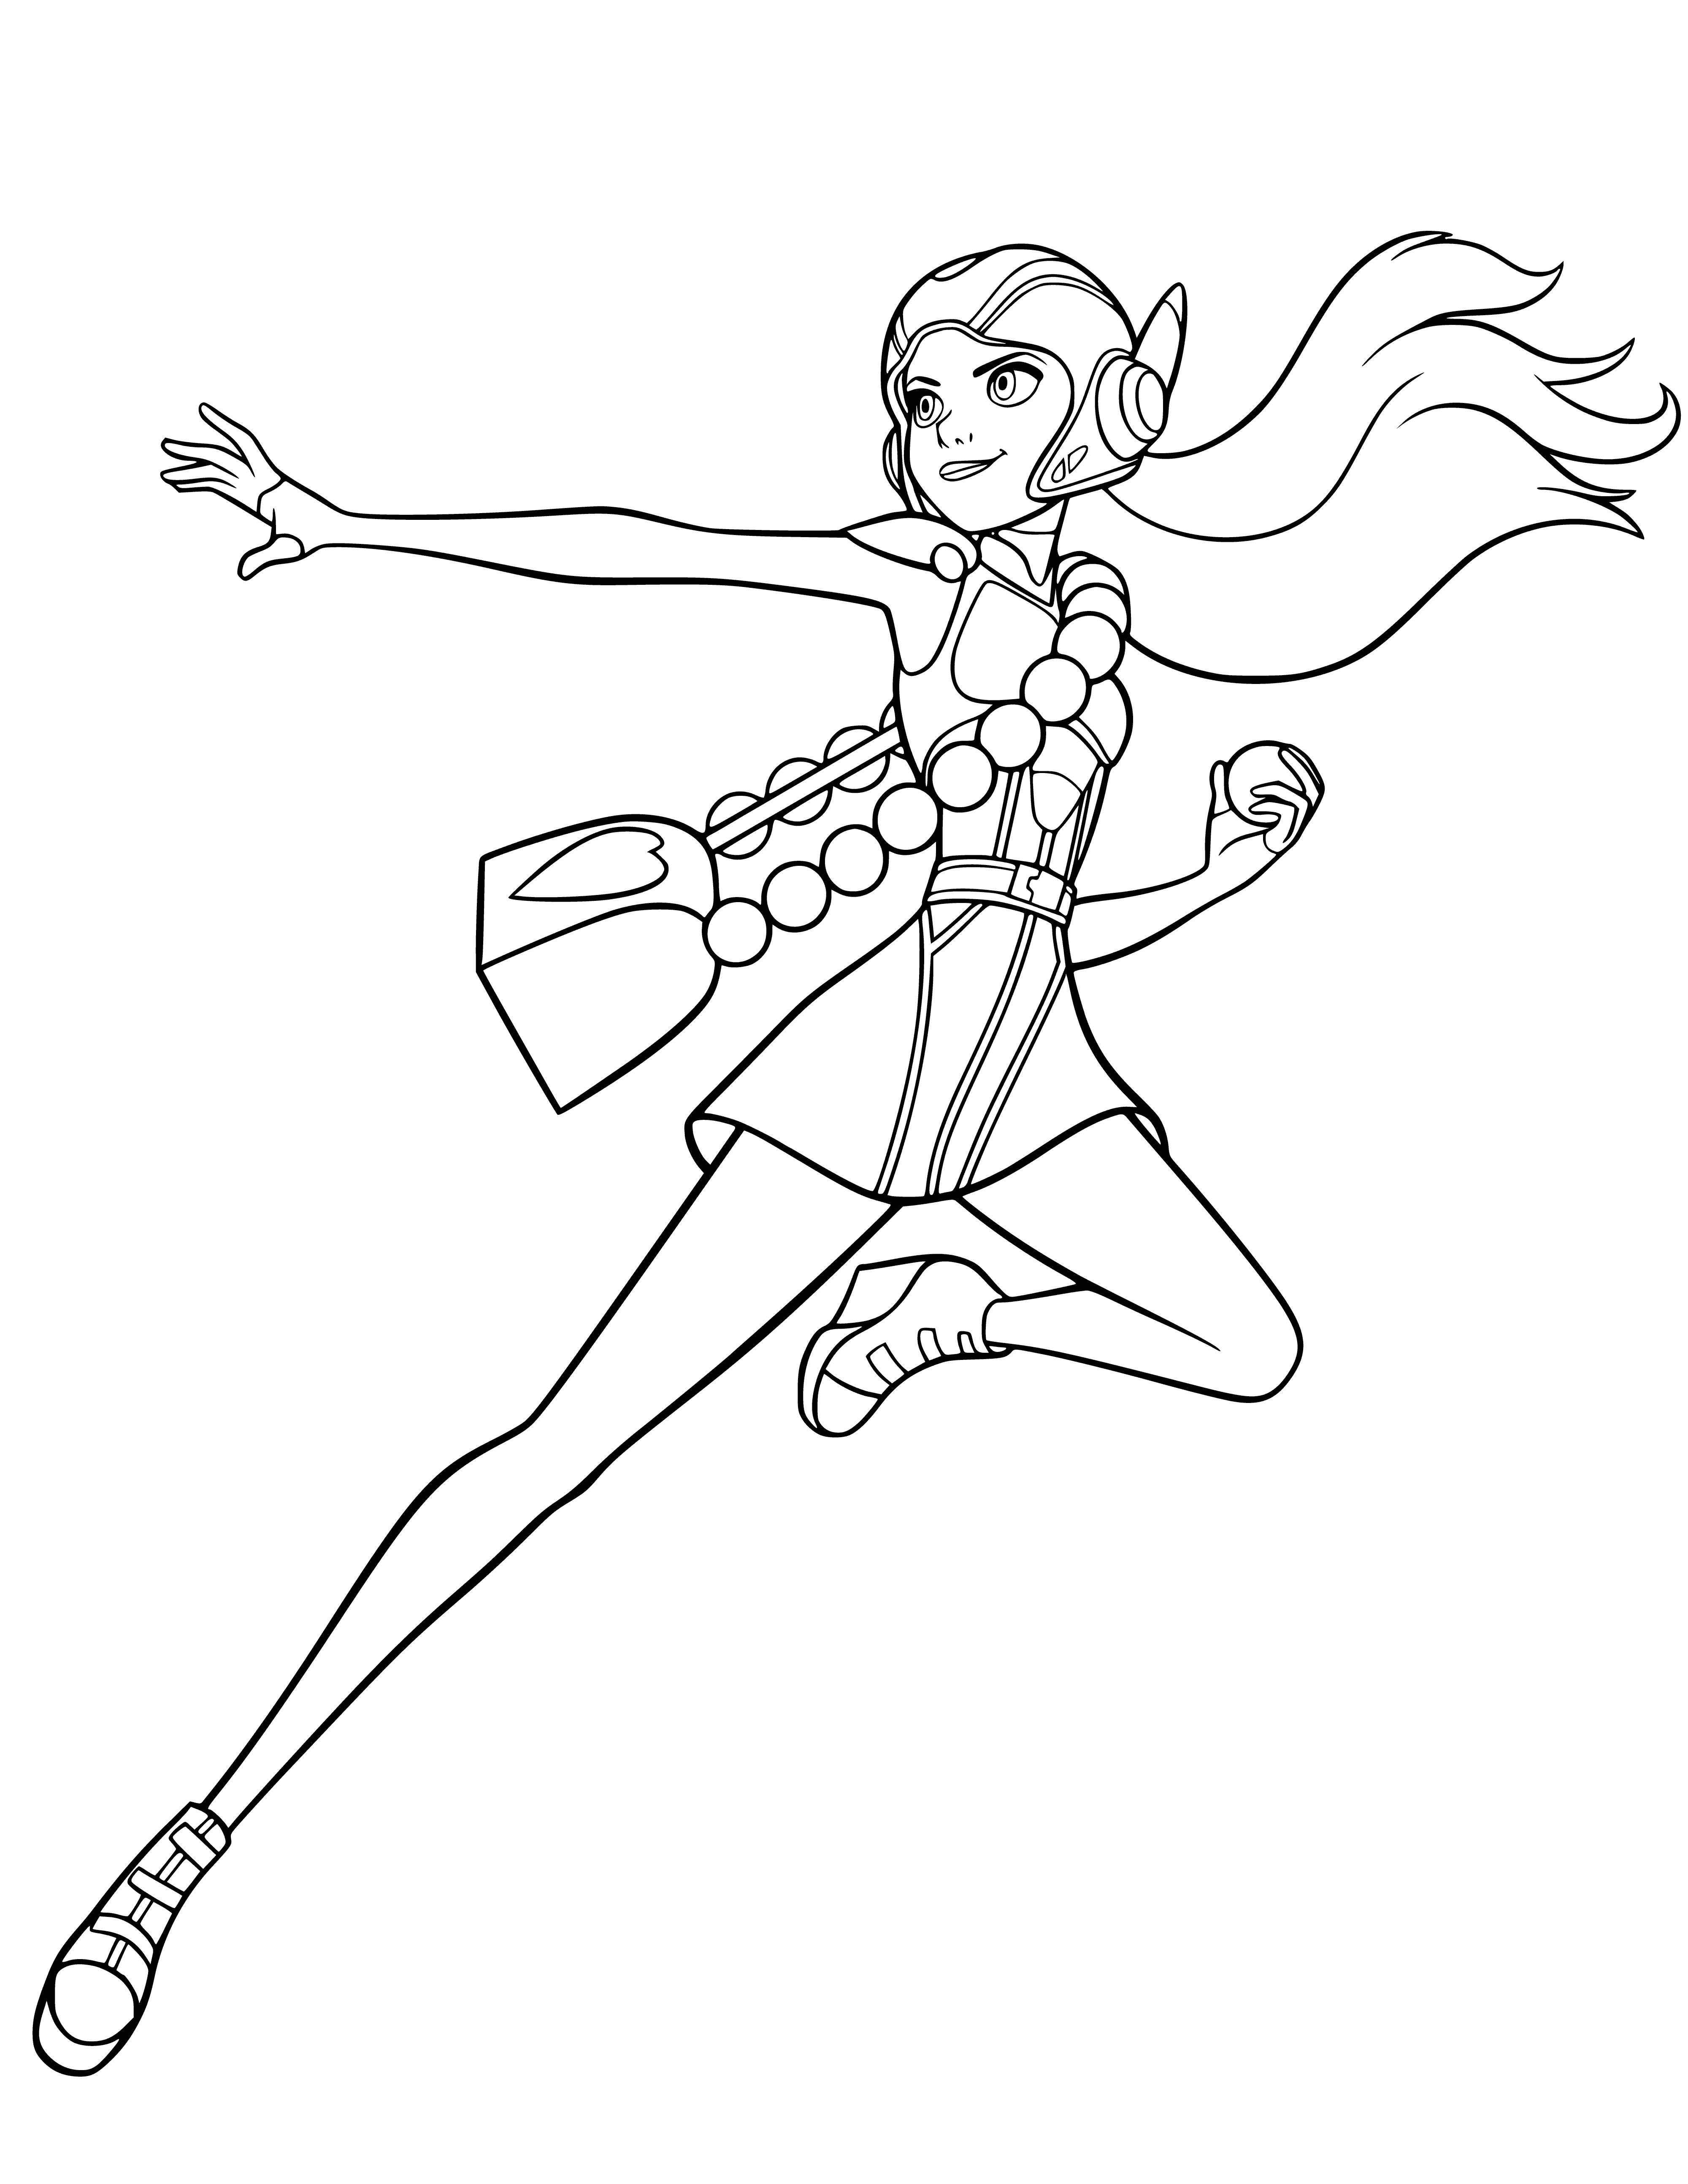 coloring page: Girl with black hair wearing a purple shirt, white skirt, black socks, and white shoes.